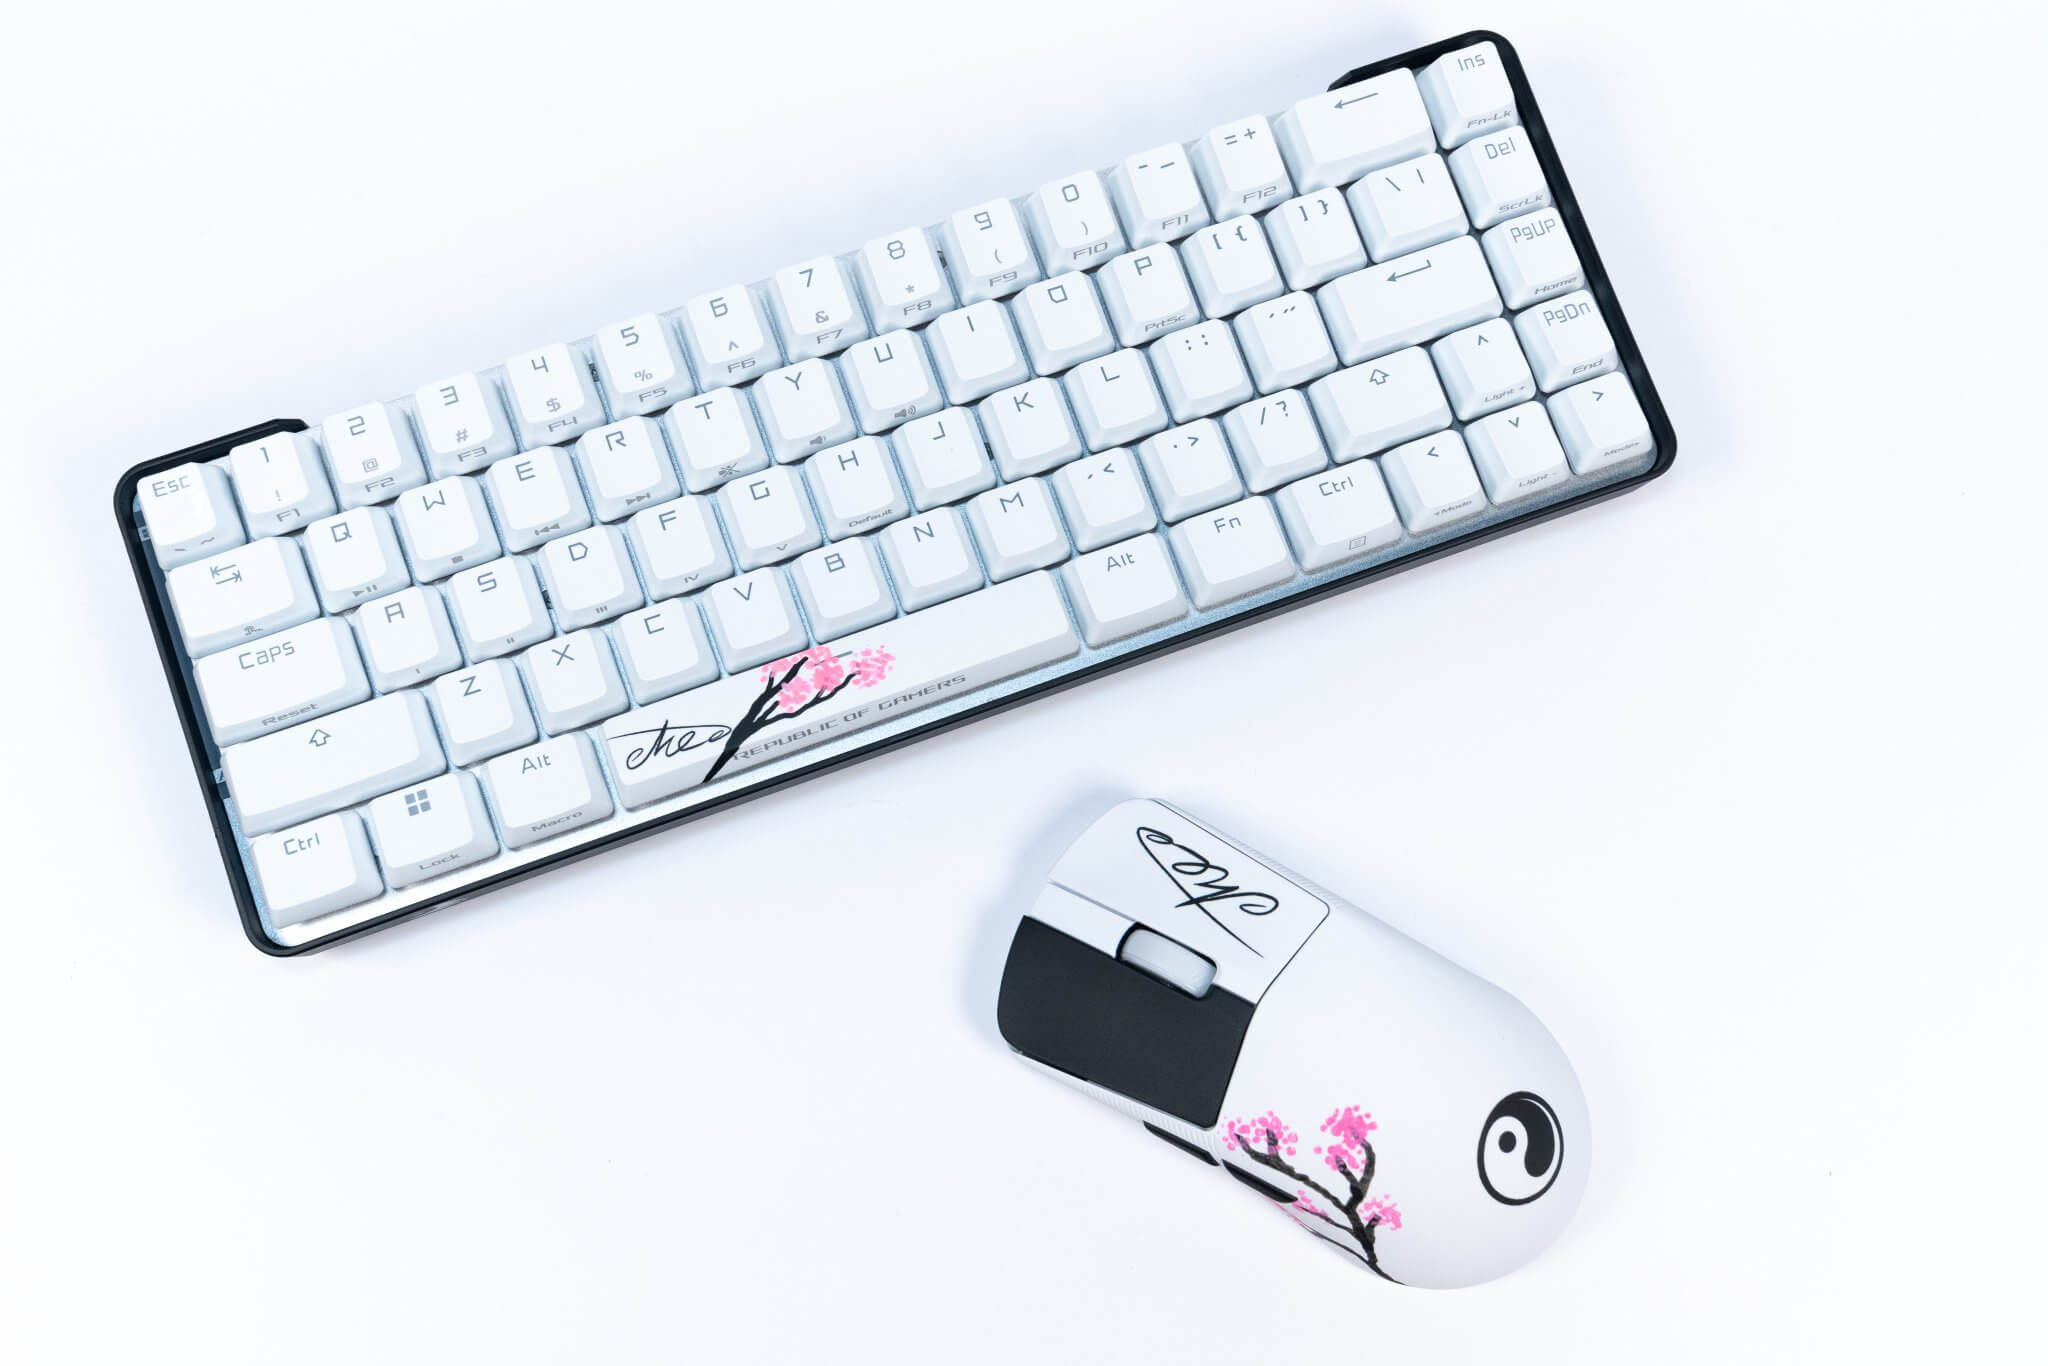 Exclusively-designed Ace player-limited edition peripherals